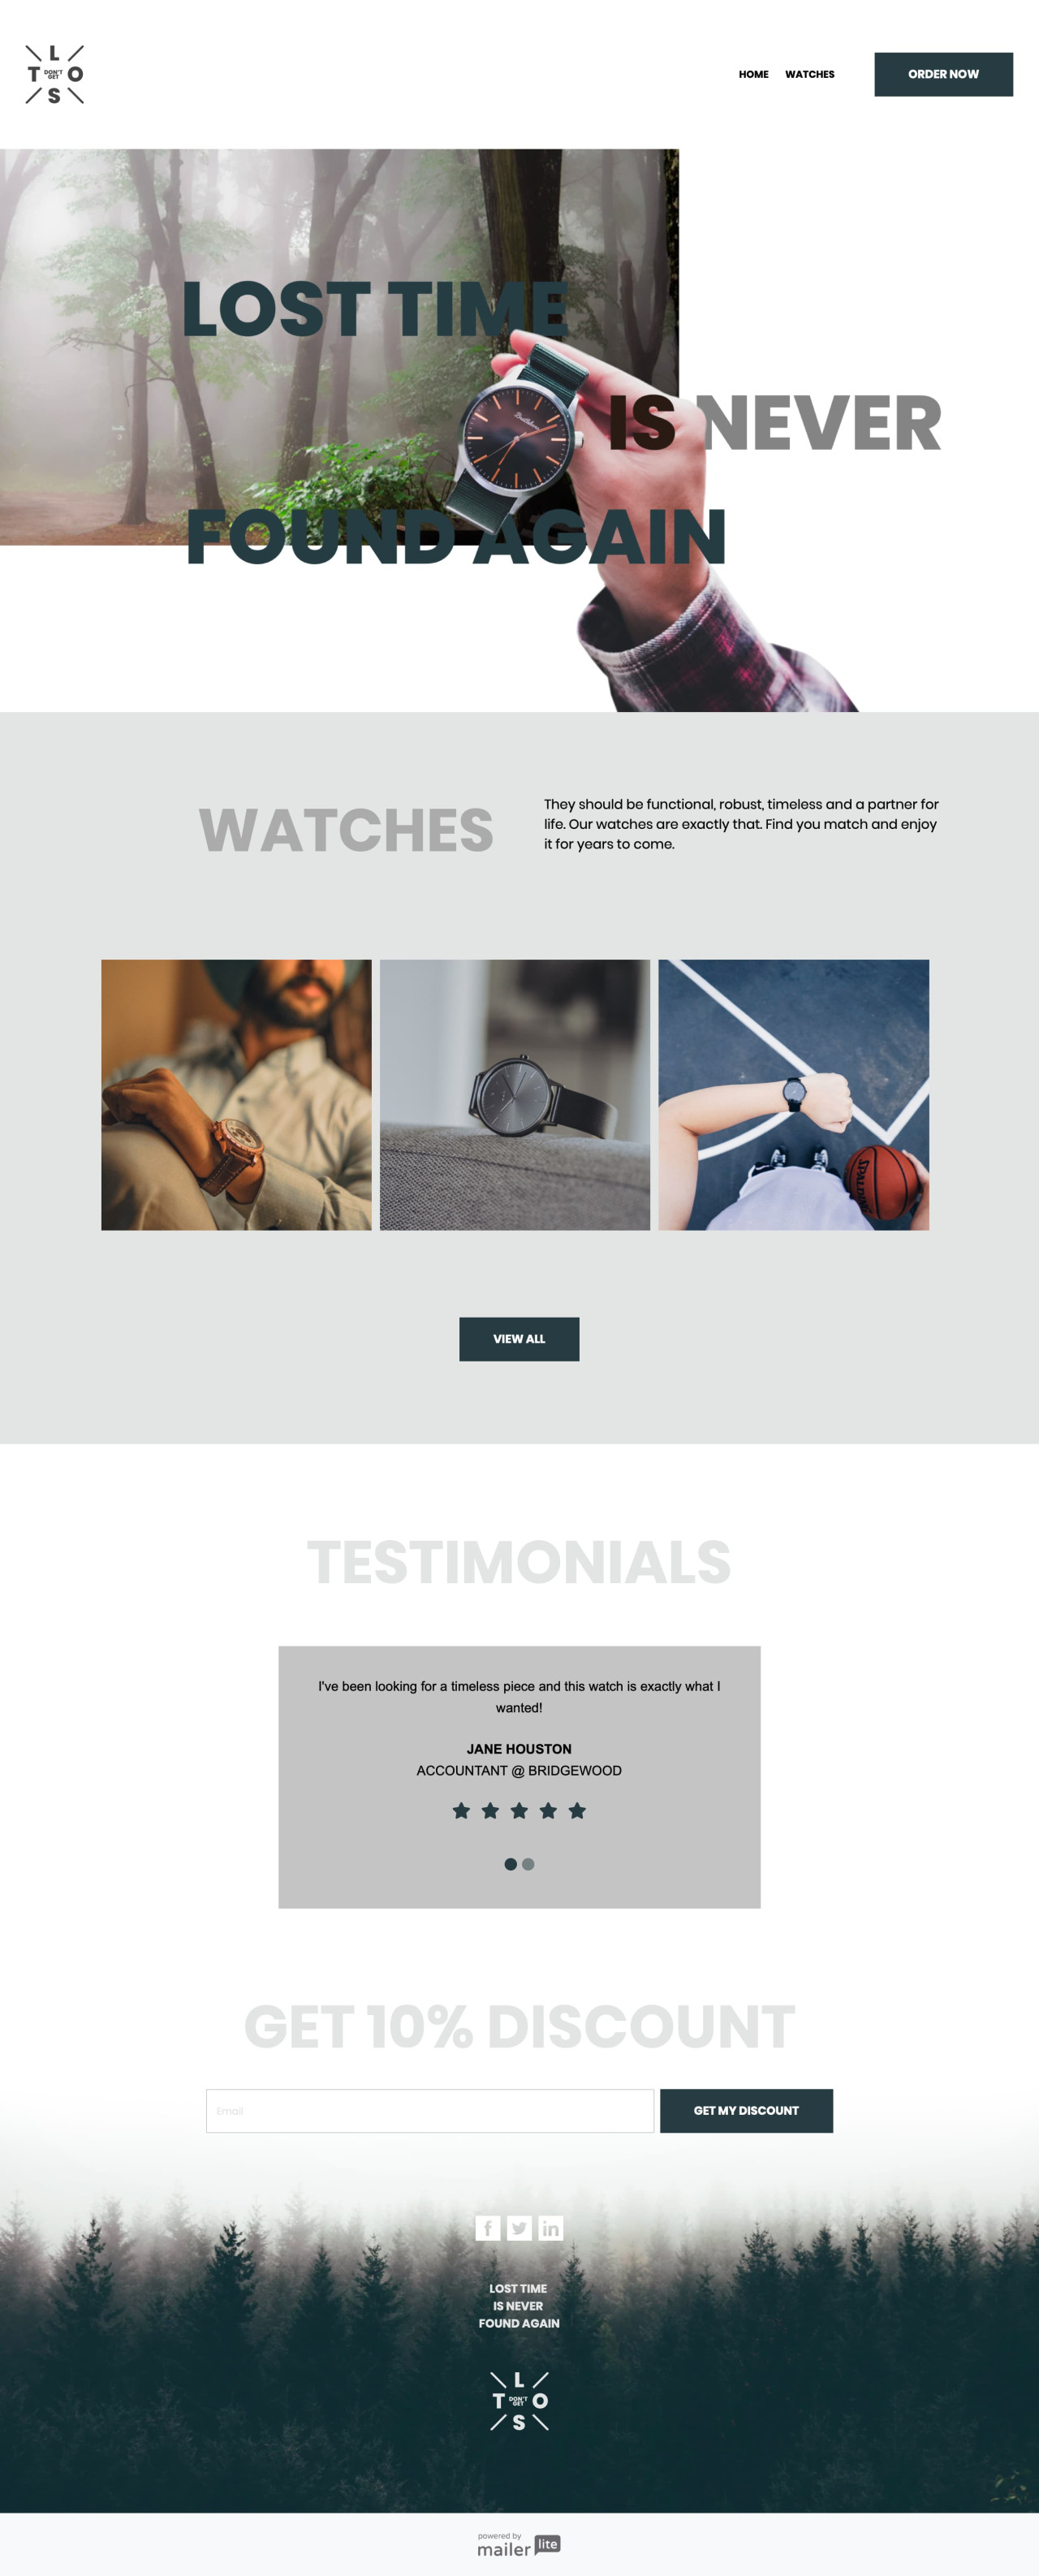 Watches template - Made by MailerLite